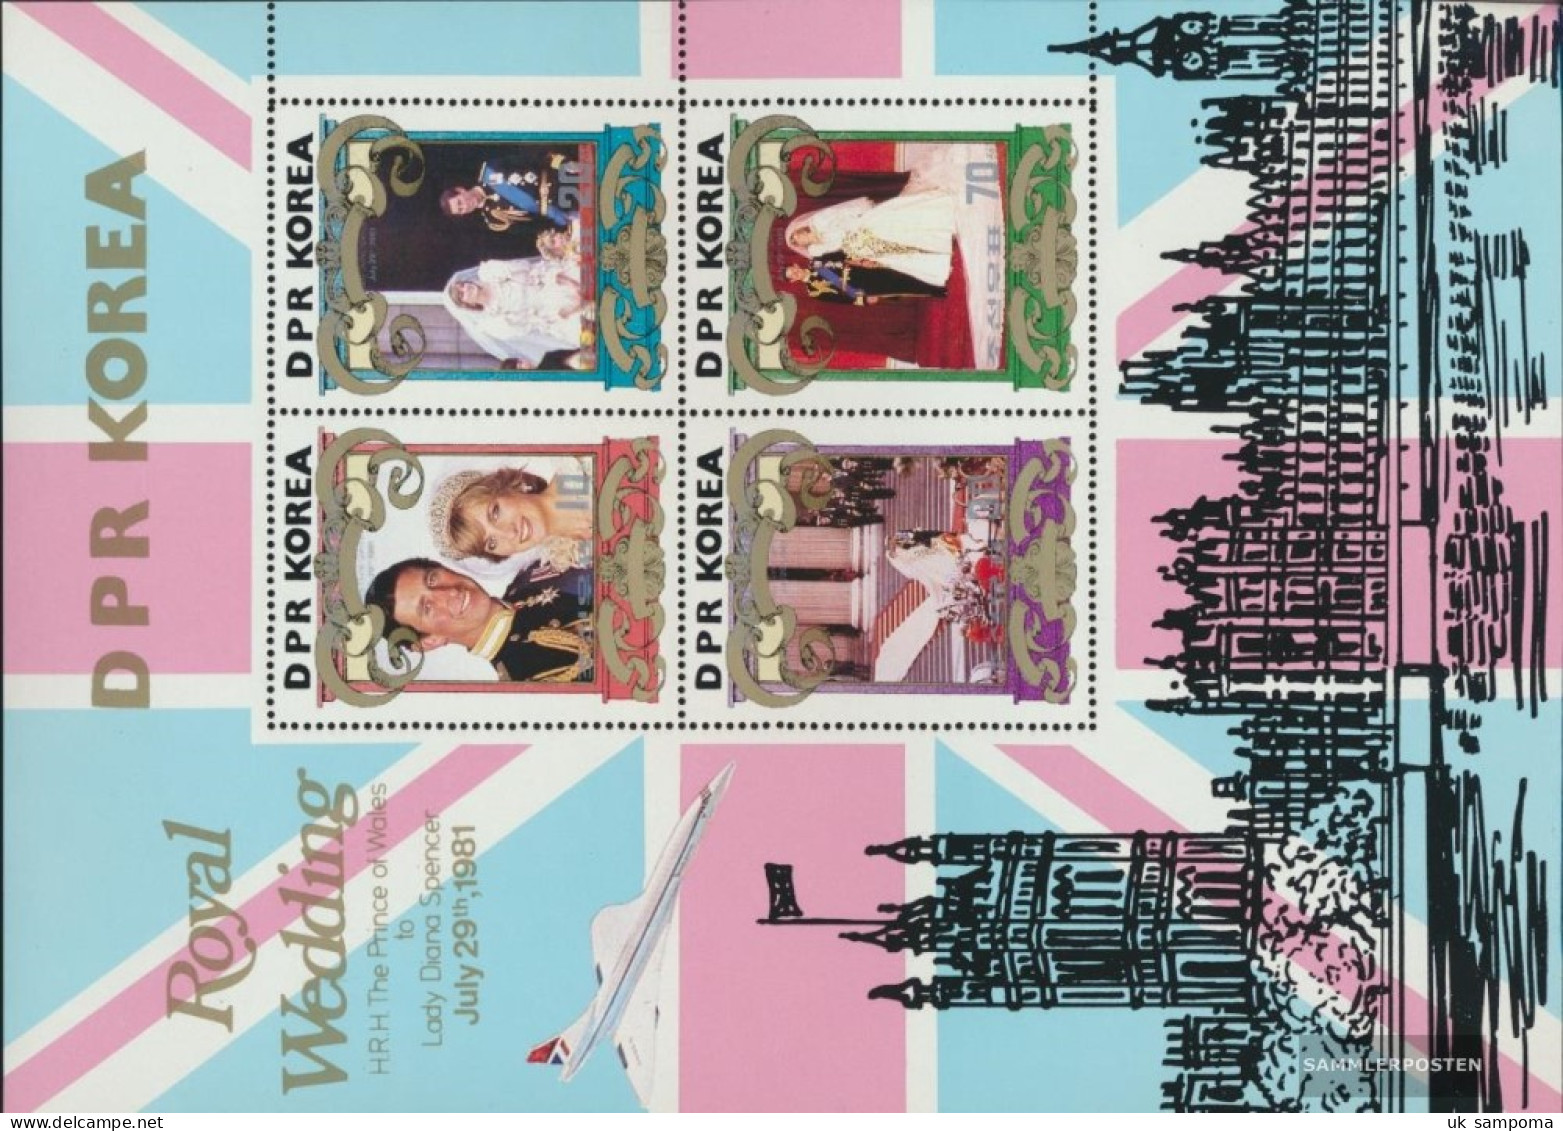 North-Korea 2173-2176A Sheetlet (complete Issue) Unmounted Mint / Never Hinged 1981 Wedding Prince Charles + Lady Di - Korea, North